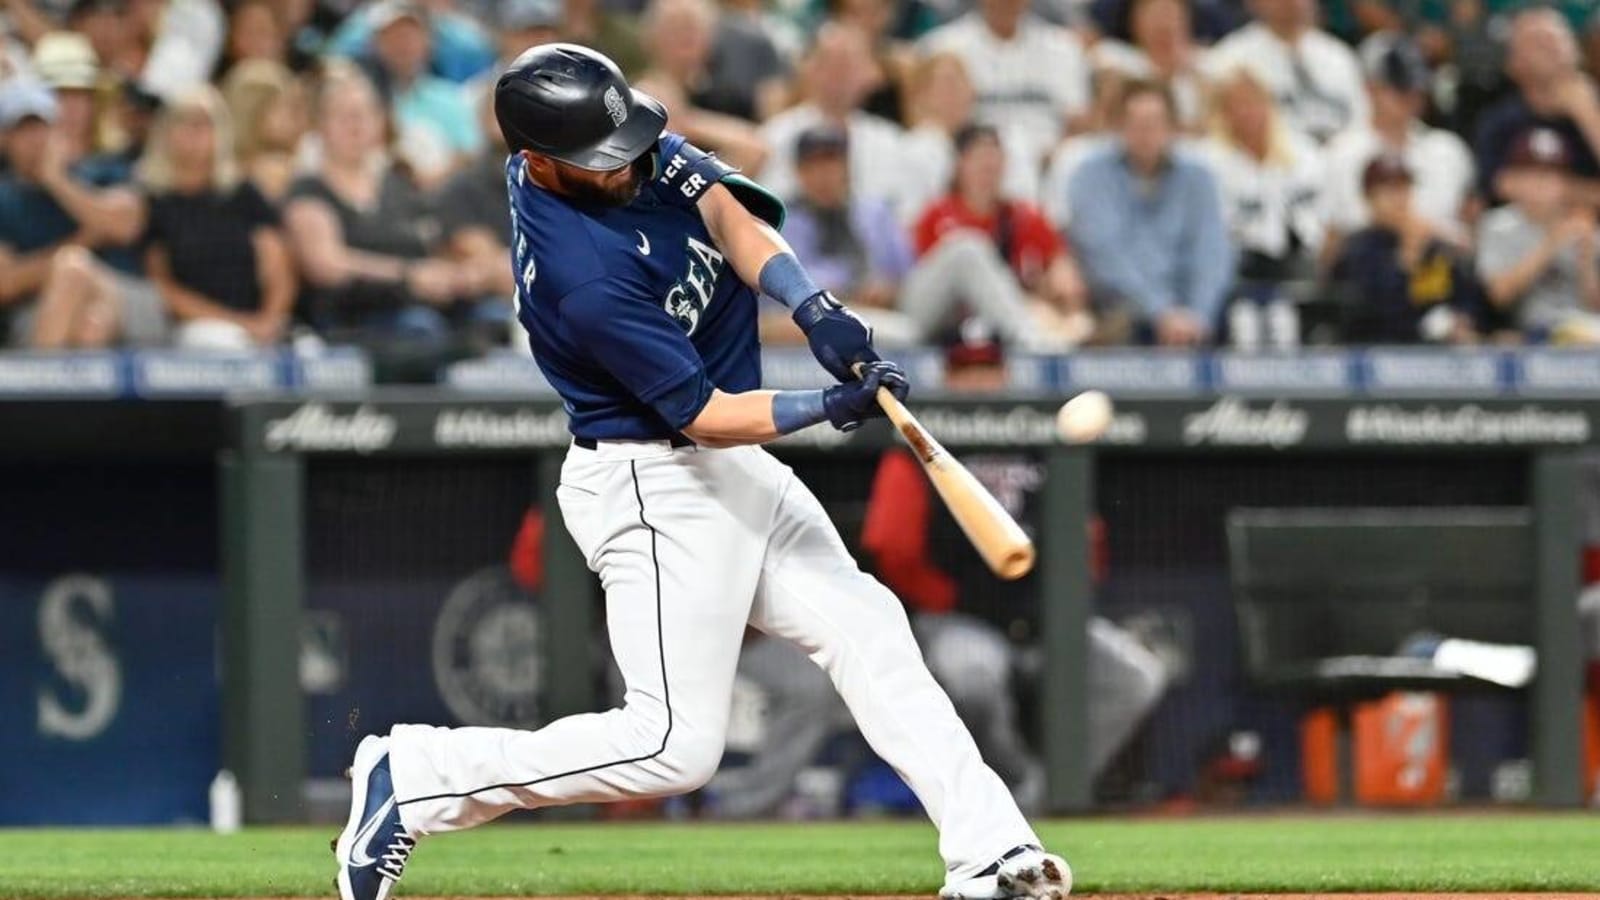 Mitch Haniger, Mariners hope to hammer Nats again